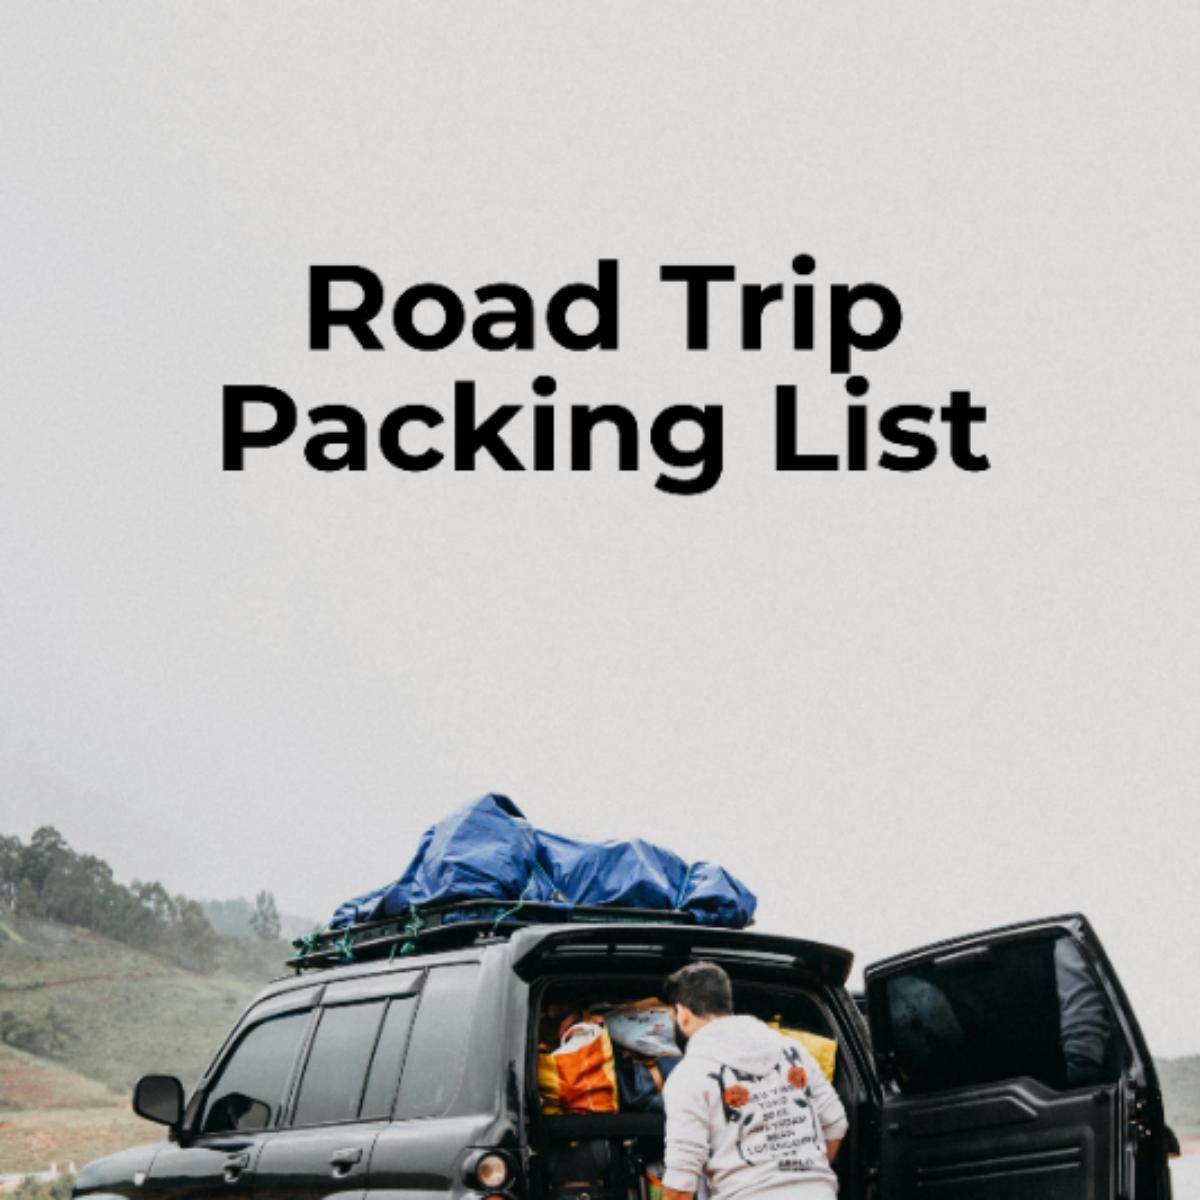 Road Trip Packing List Template